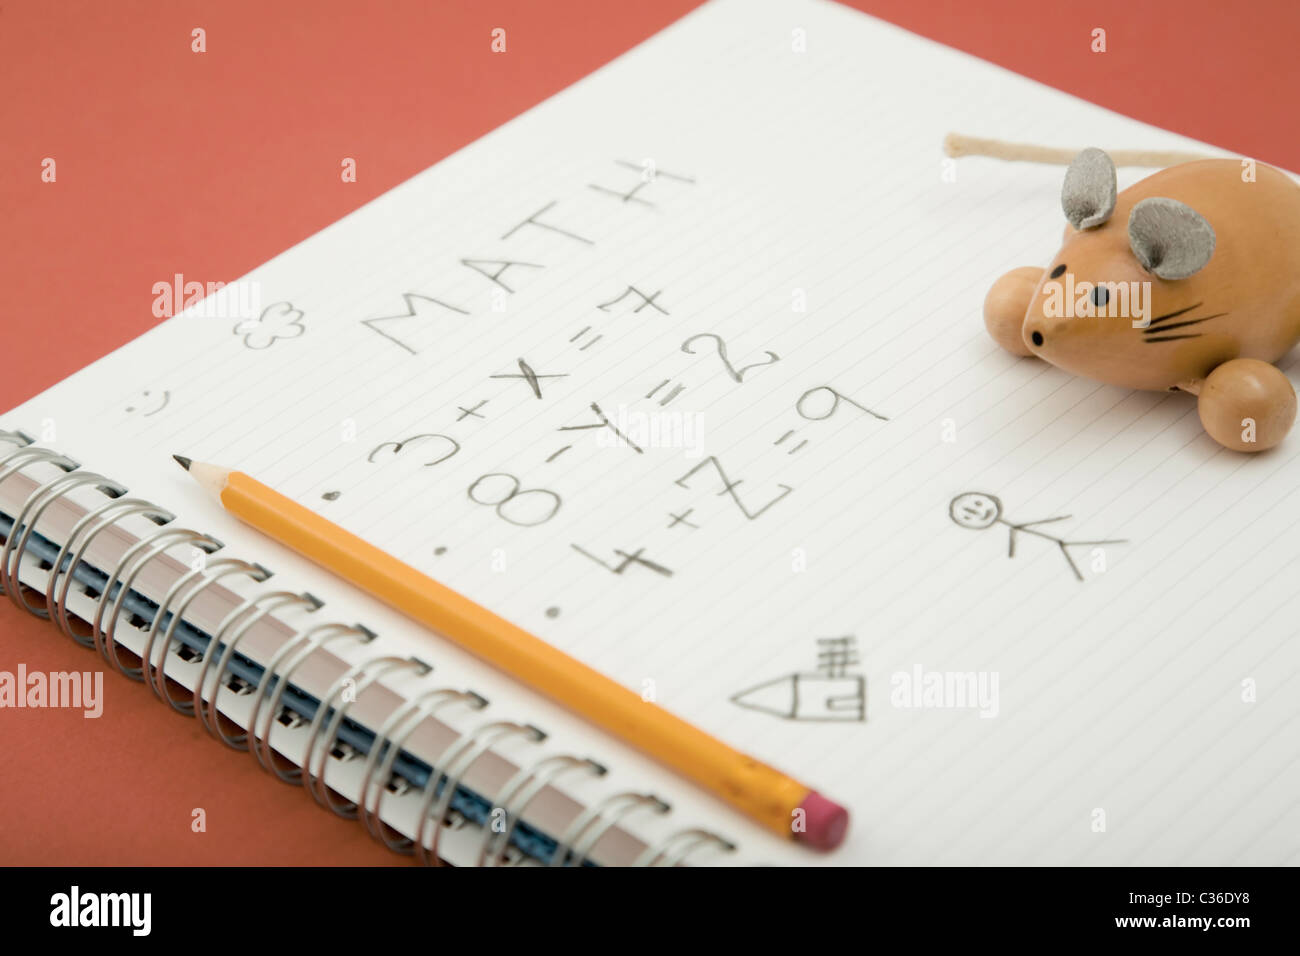 math homework with pencil and wooden toy Stock Photo